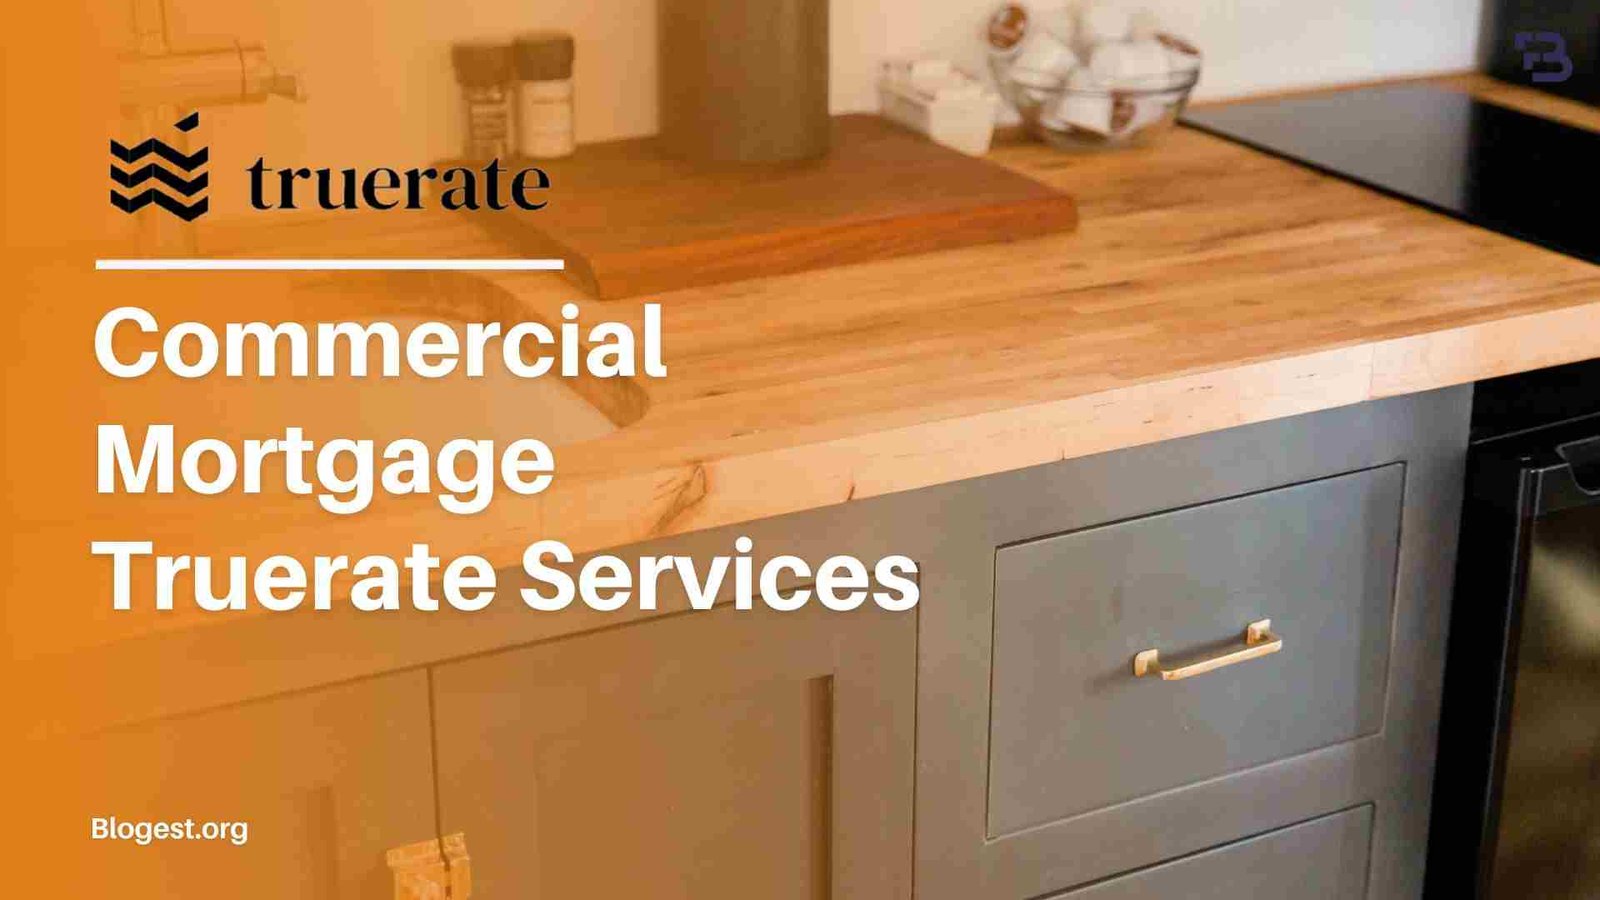 A Look At Commercial Mortgage Truerate Services